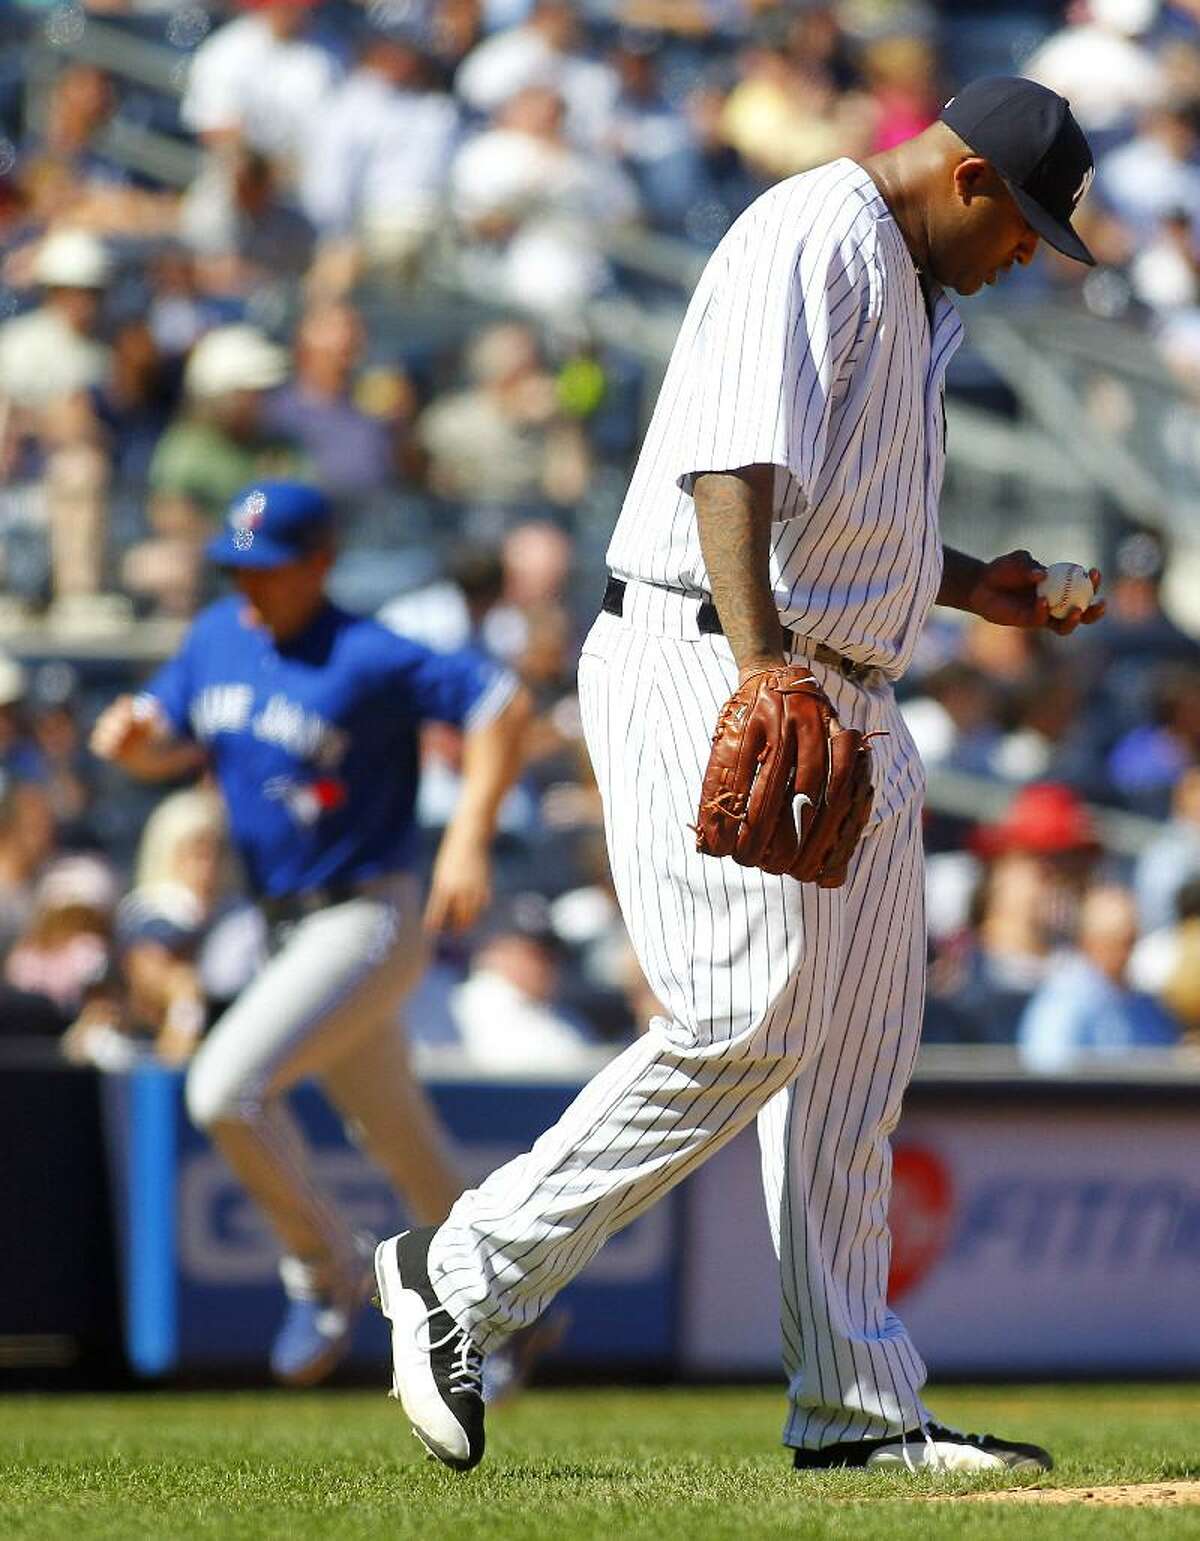 ASSOCIATED PRESS New York Yankees pitcher CC Sabathia looks down as Toronto Blue Jays' Adam Lind rounds third base on a two run-home run hit by teammate Yunel Escobar in the sixth inning of Wednesday afternoon's game at Yankee Stadium in New York. The Yankees lost 8-5.